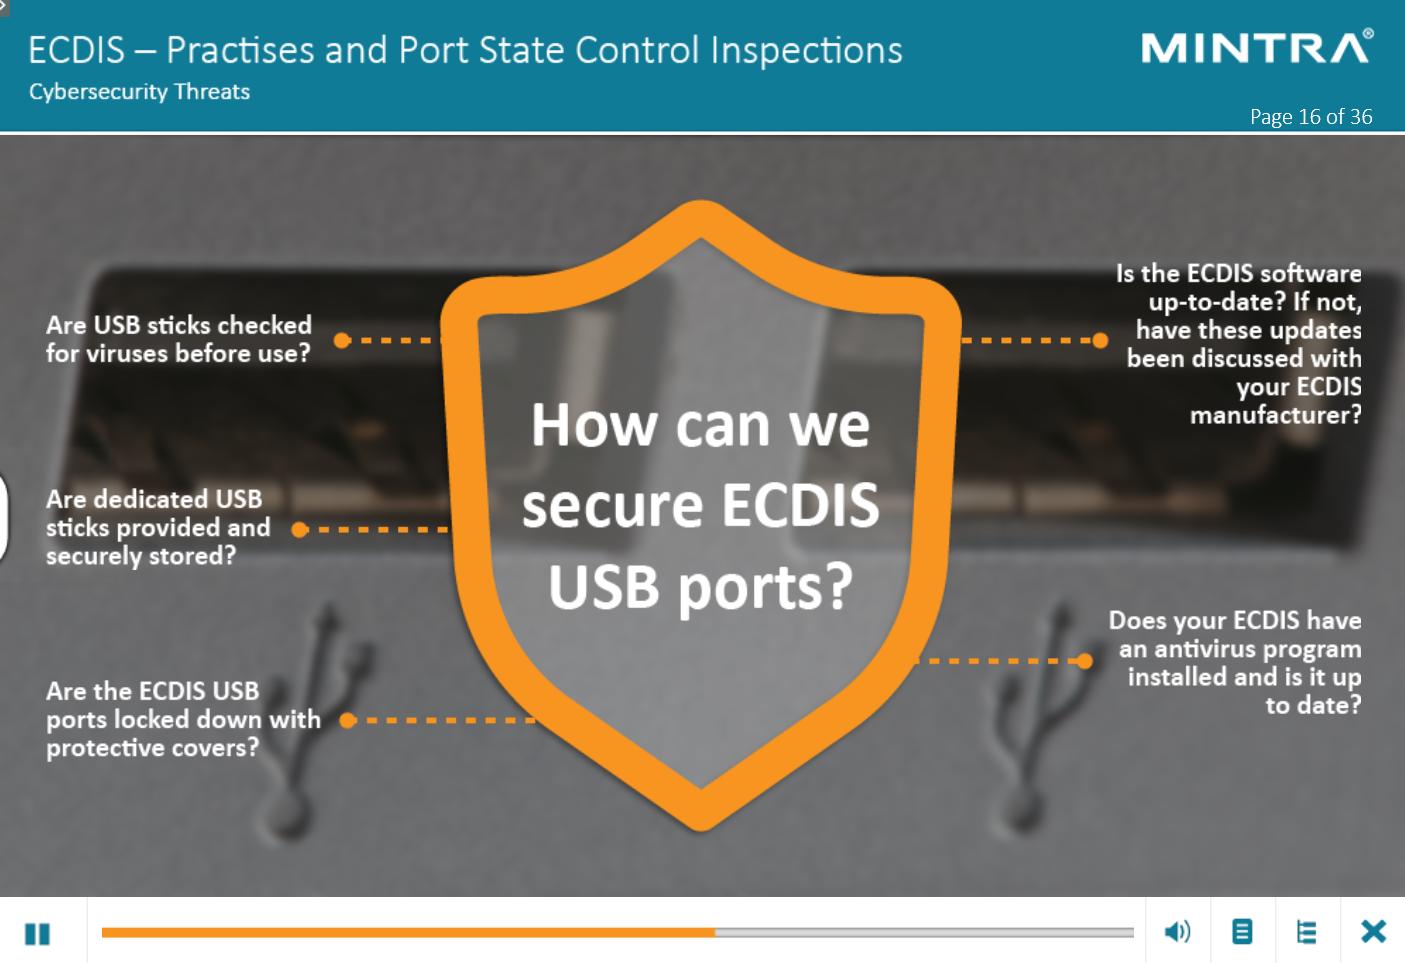 ECDIS Practises and Port State Control Inspections Maritime Training 4